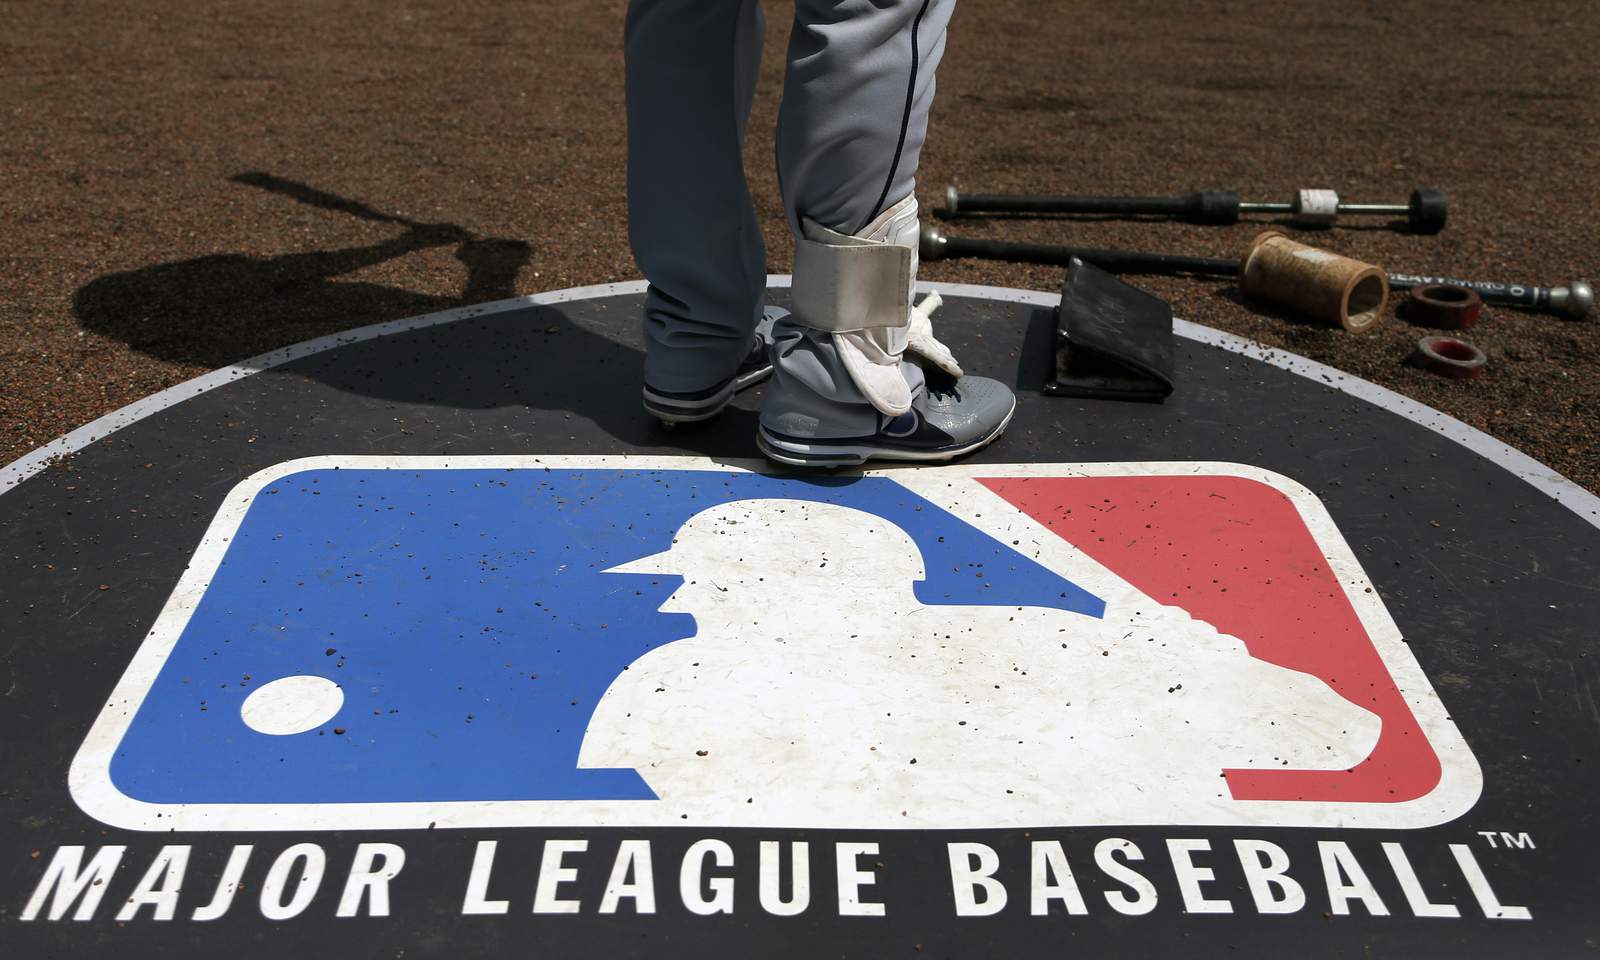 Playing for free, salary drop, 2022 lockout possible for MLB